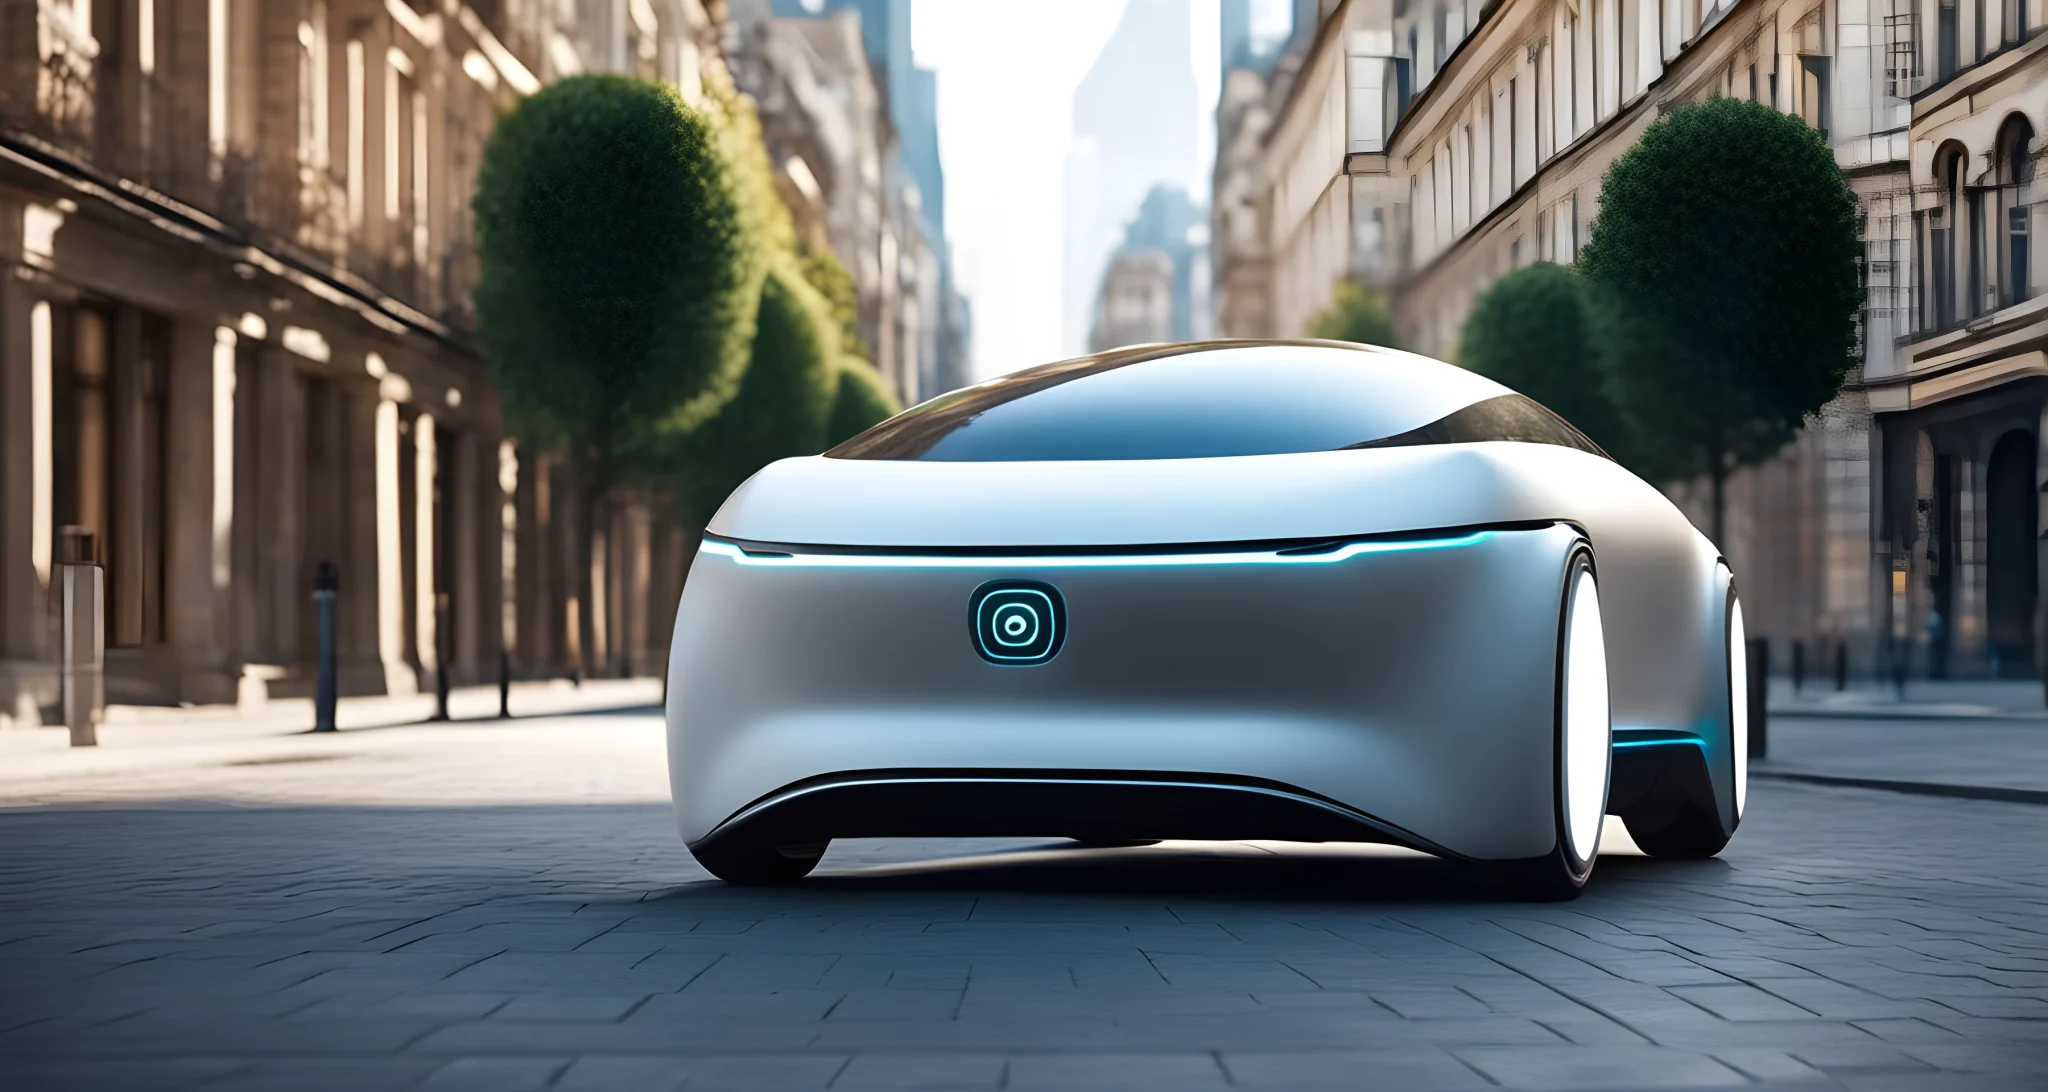 The image shows a sleek, futuristic autonomous electric vehicle on a city street, with advanced sensors and cameras on its exterior.